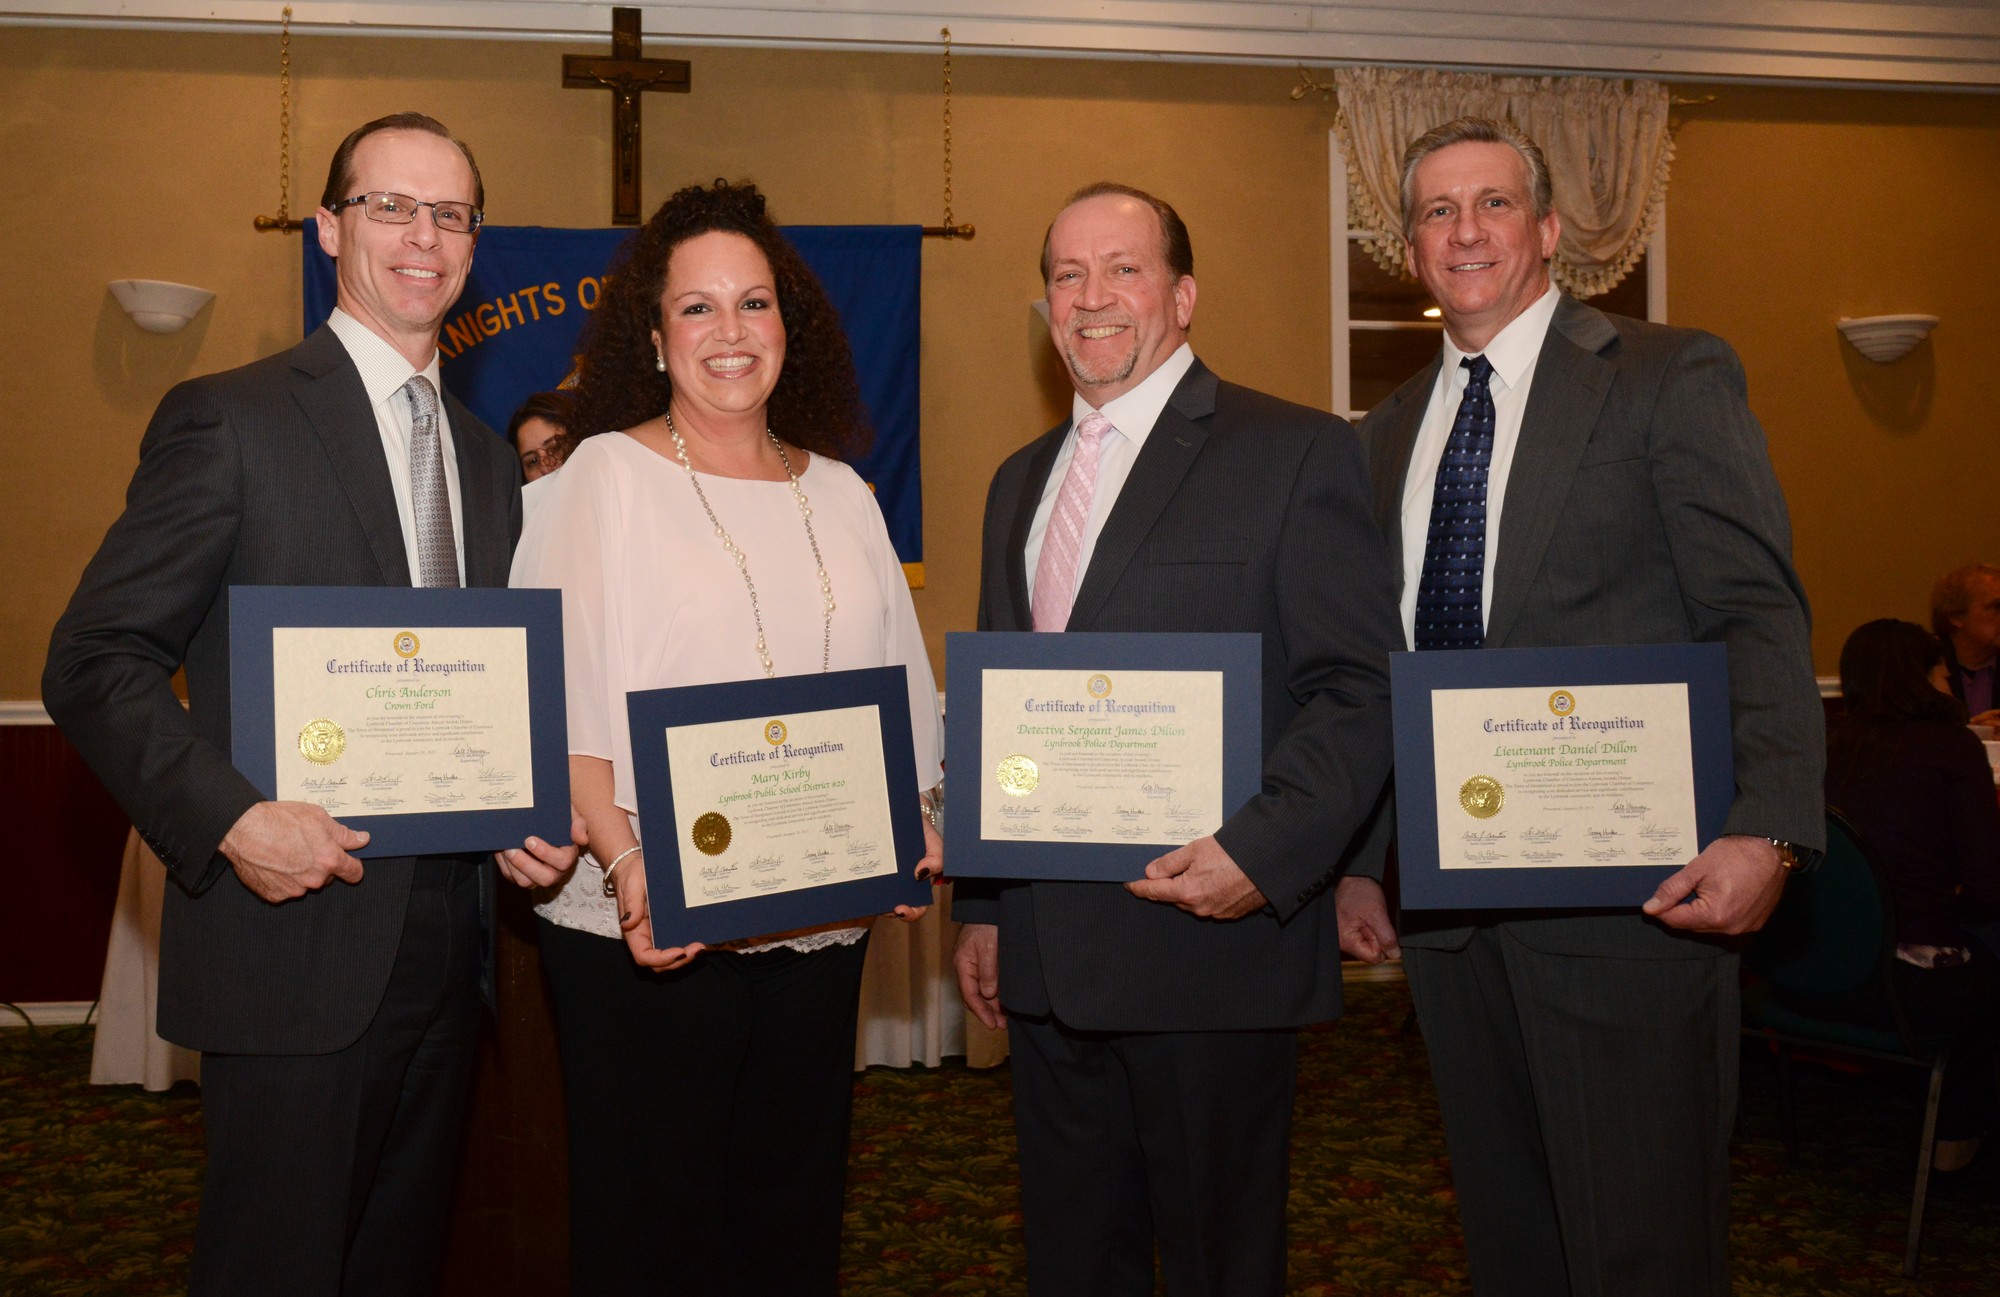 The honorees proudly dispalyed their awards. From left were Chris Anderson, Mary Kirby, James Dillon and Daniel Dillon.